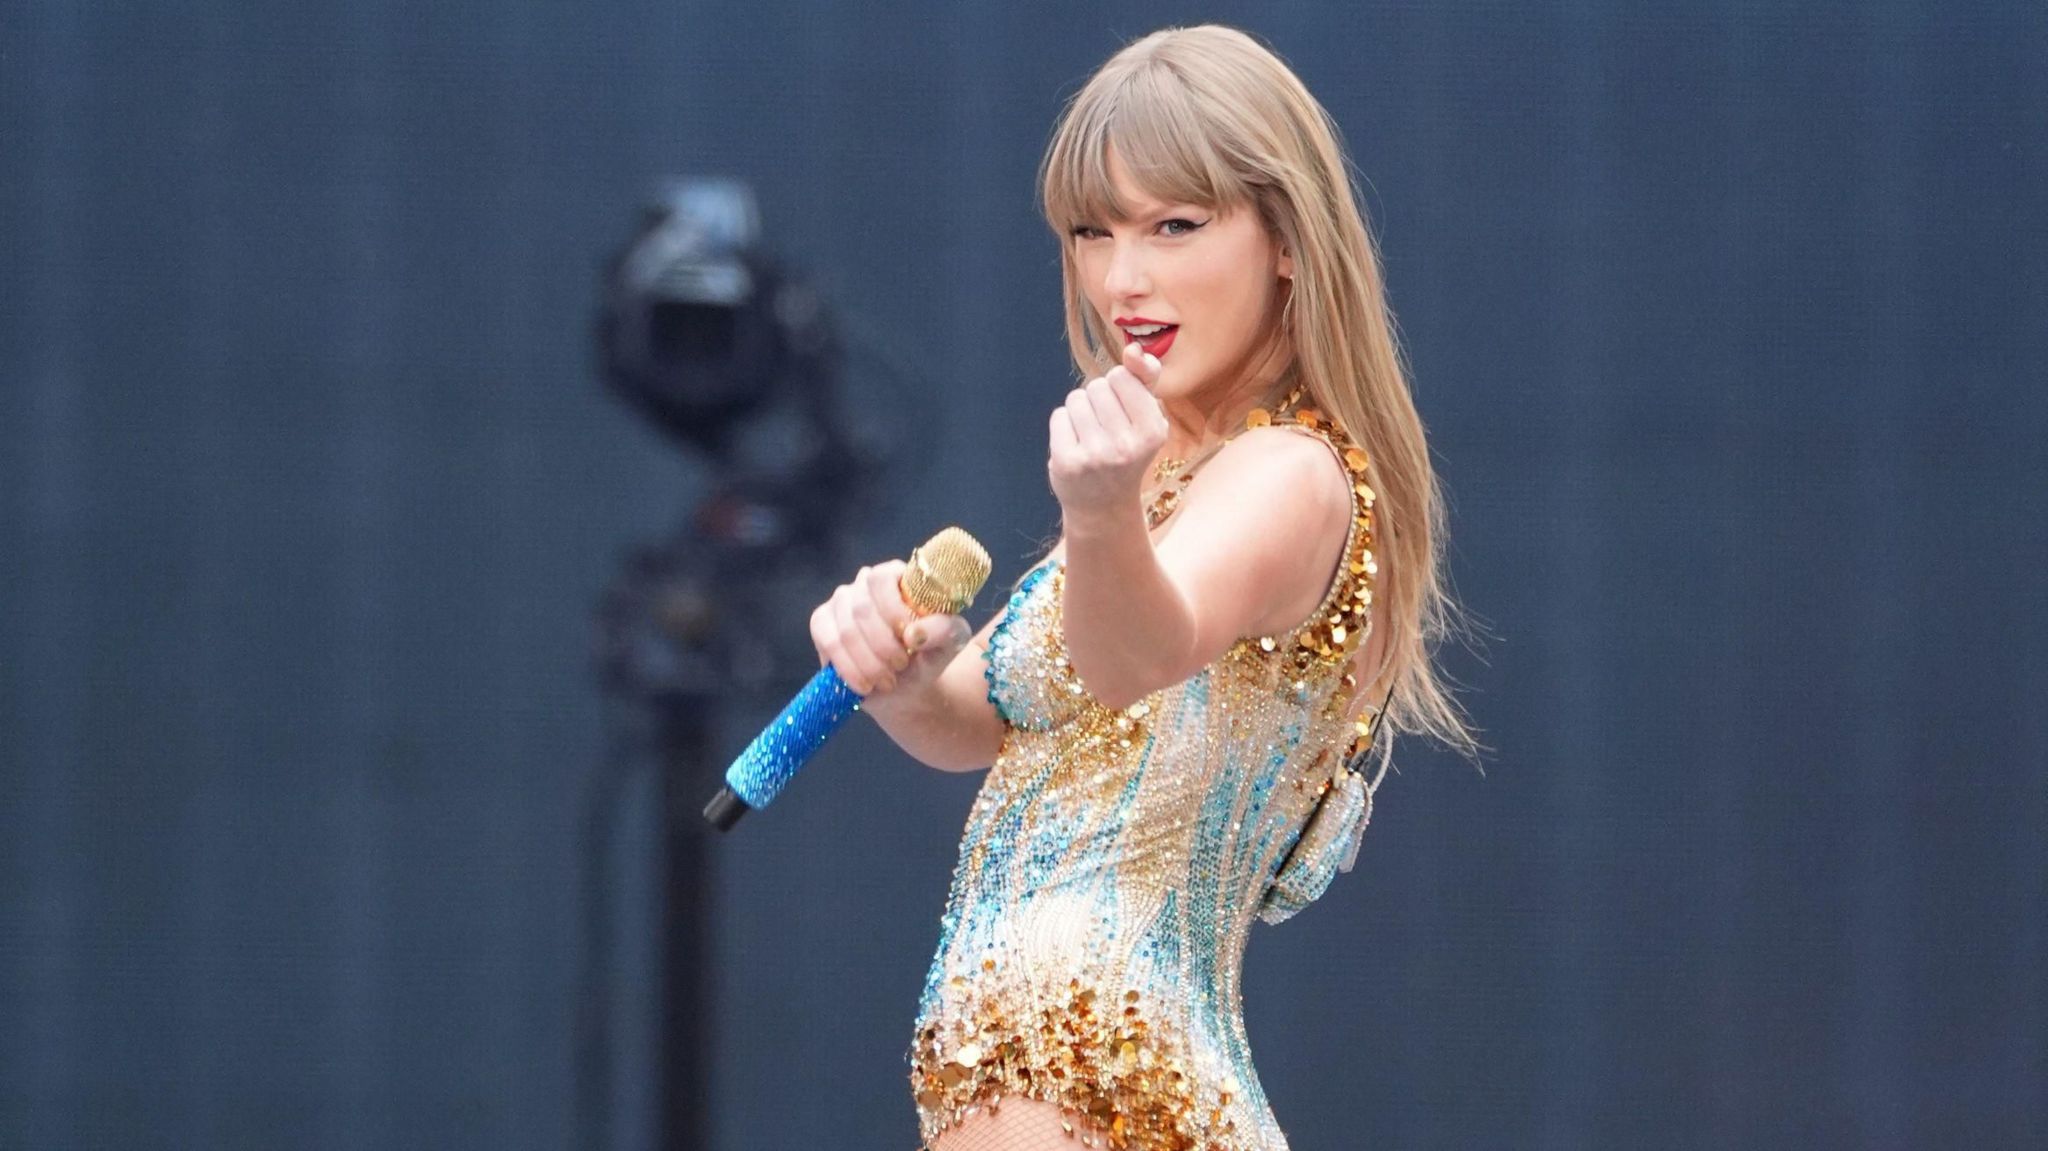 Taylor Swift performing in a sparkling gold and blue leotard, holding a blue and gold microphone and looking at the camera